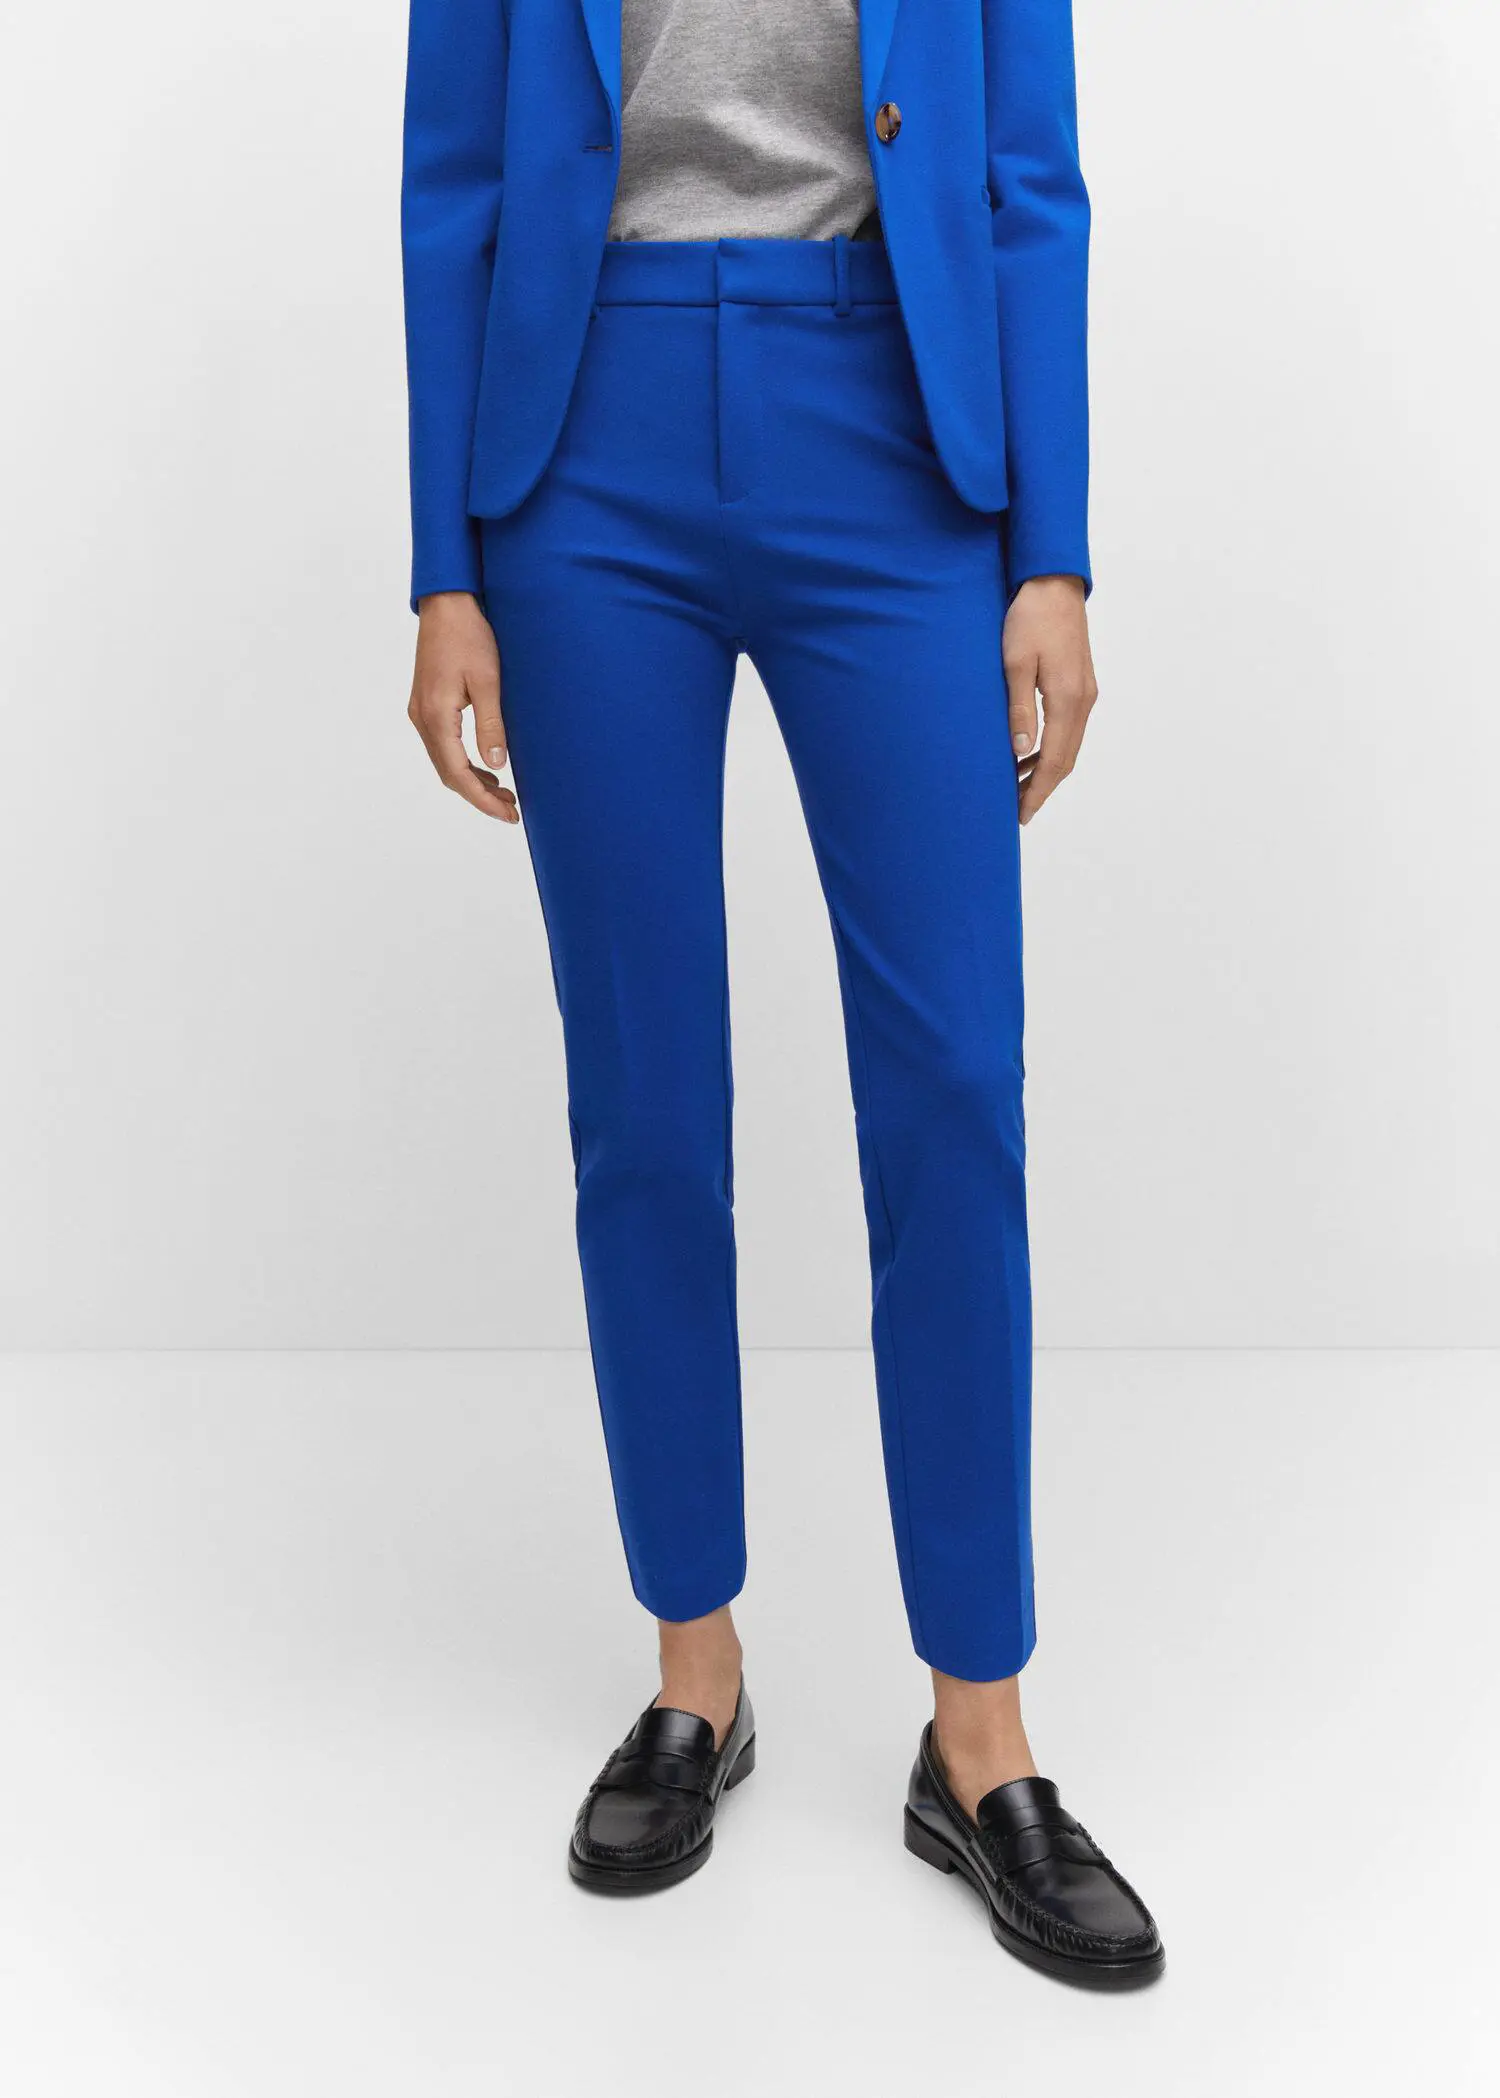 Mango Rome-knit straight trousers. a woman wearing a blue suit and black shoes. 